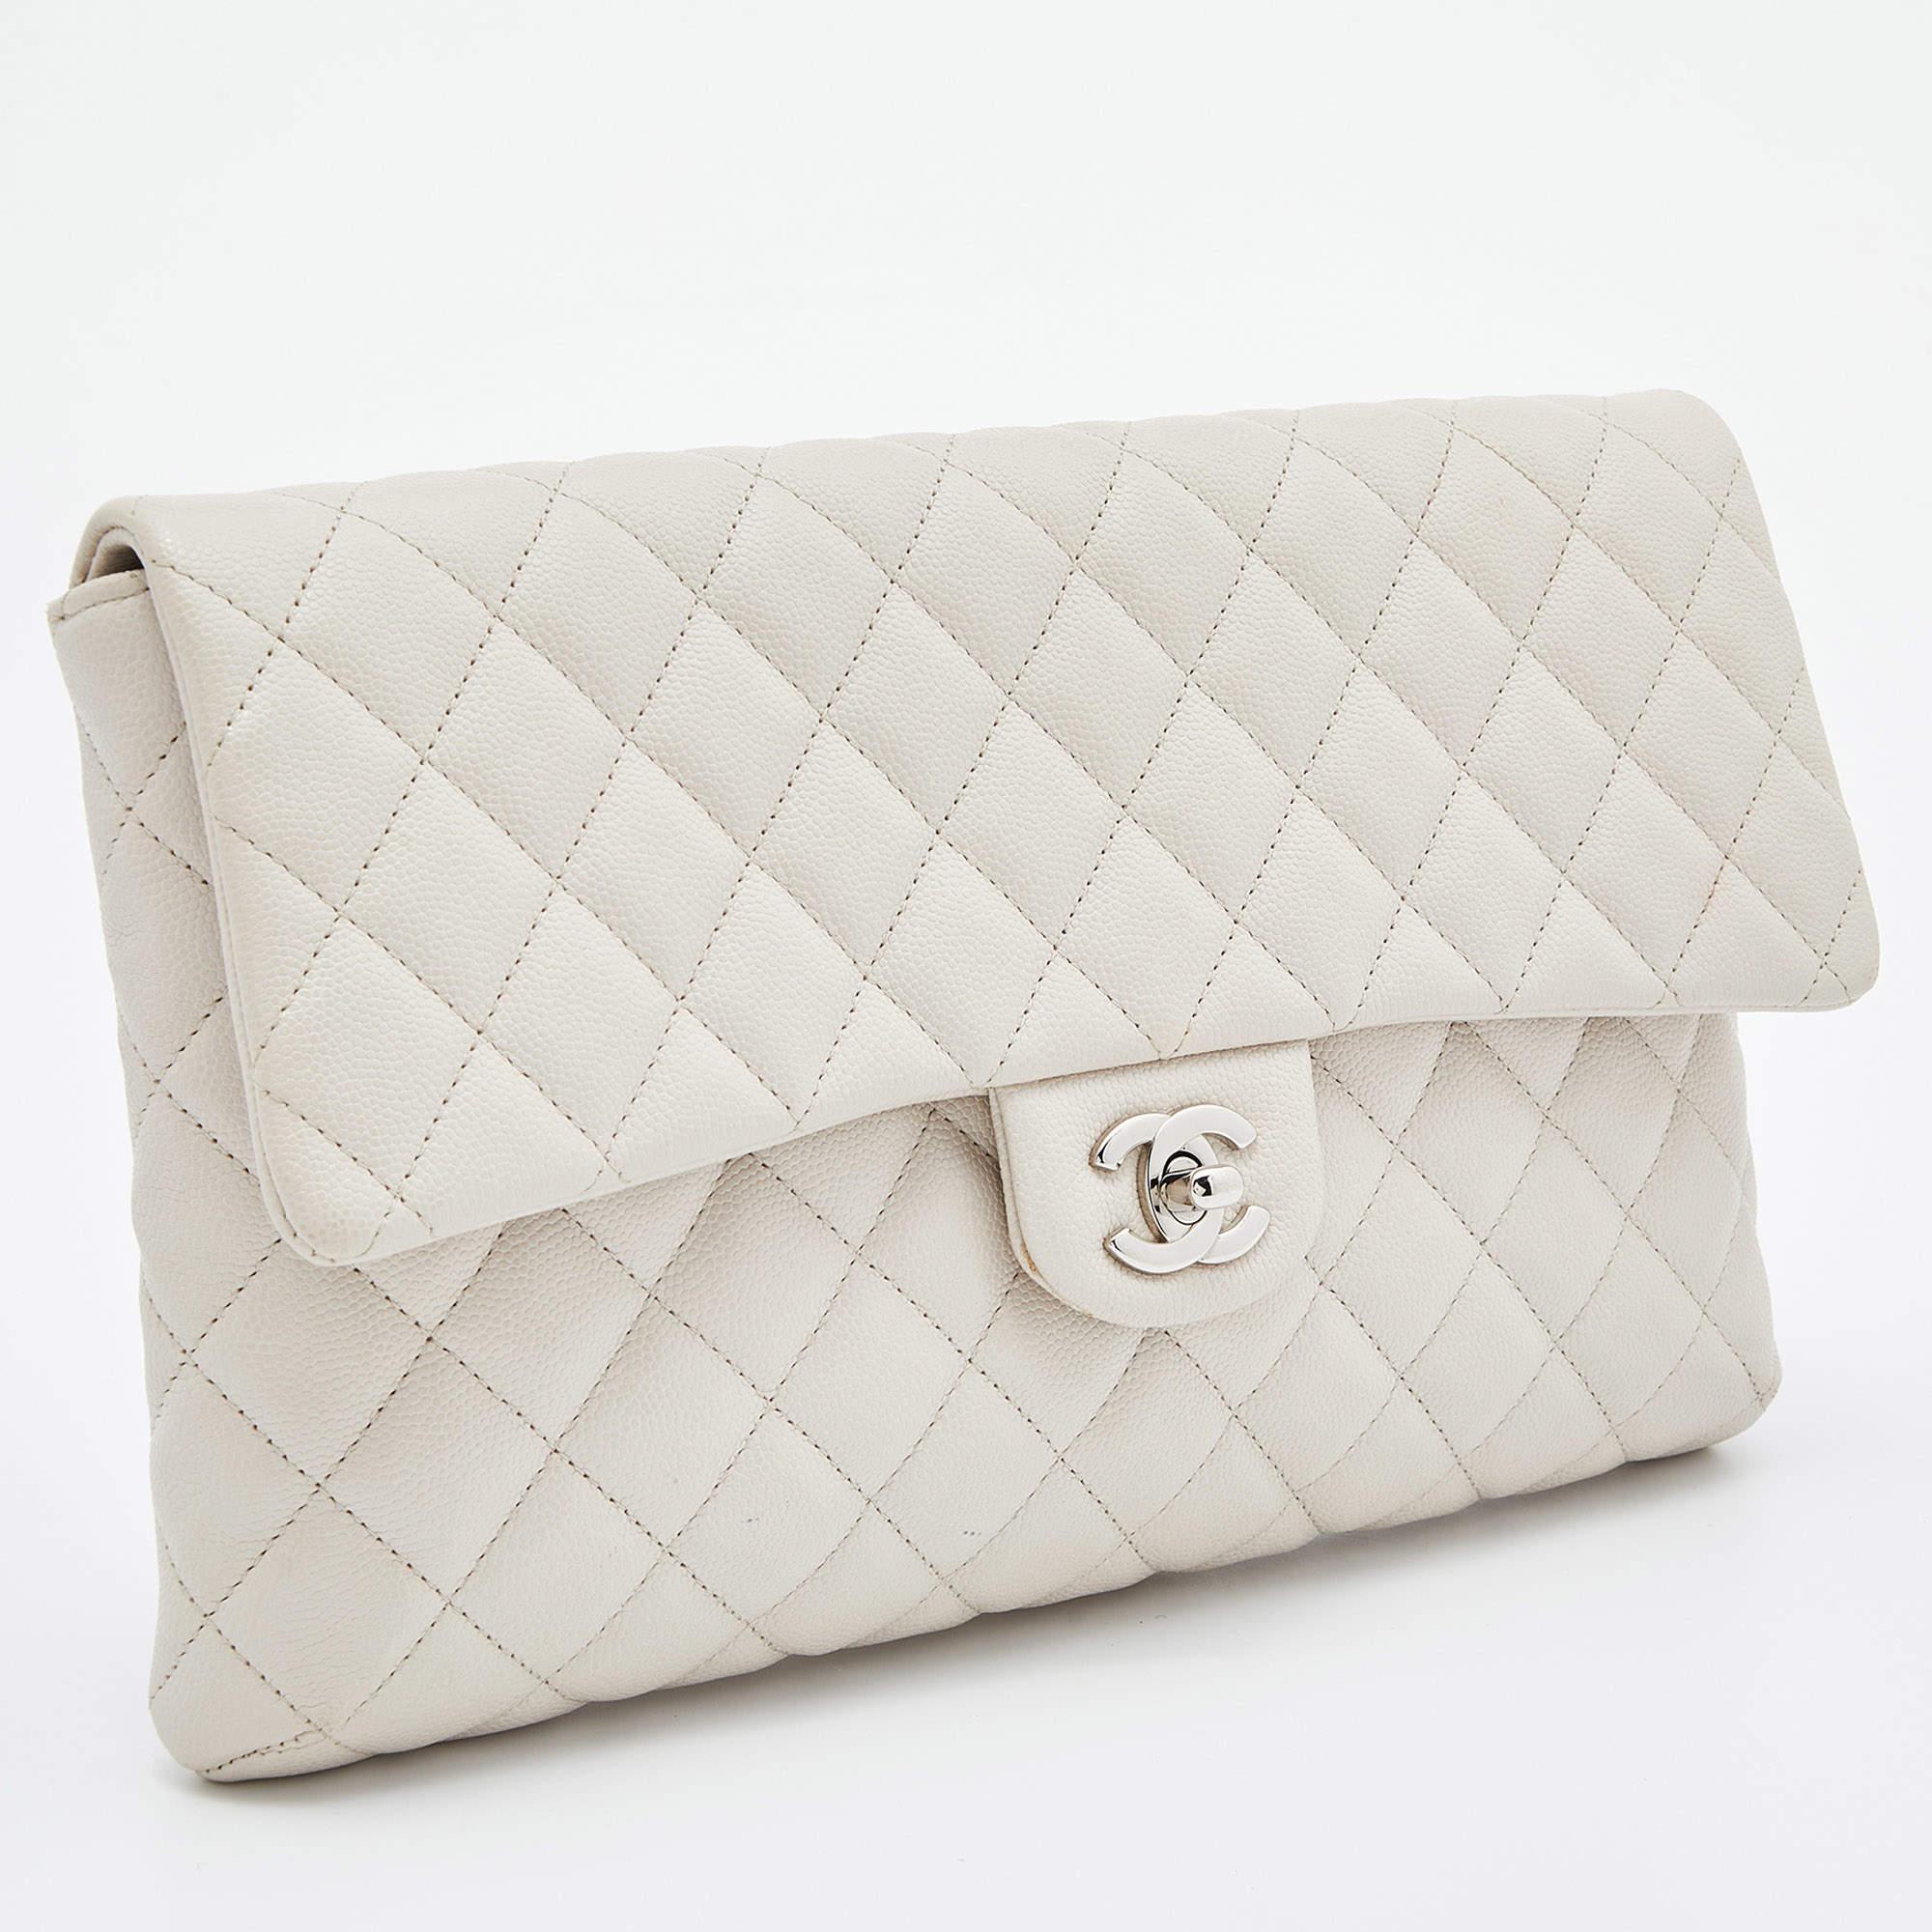 Women's Chanel Off White Quilted Caviar Leather Flap Clutch